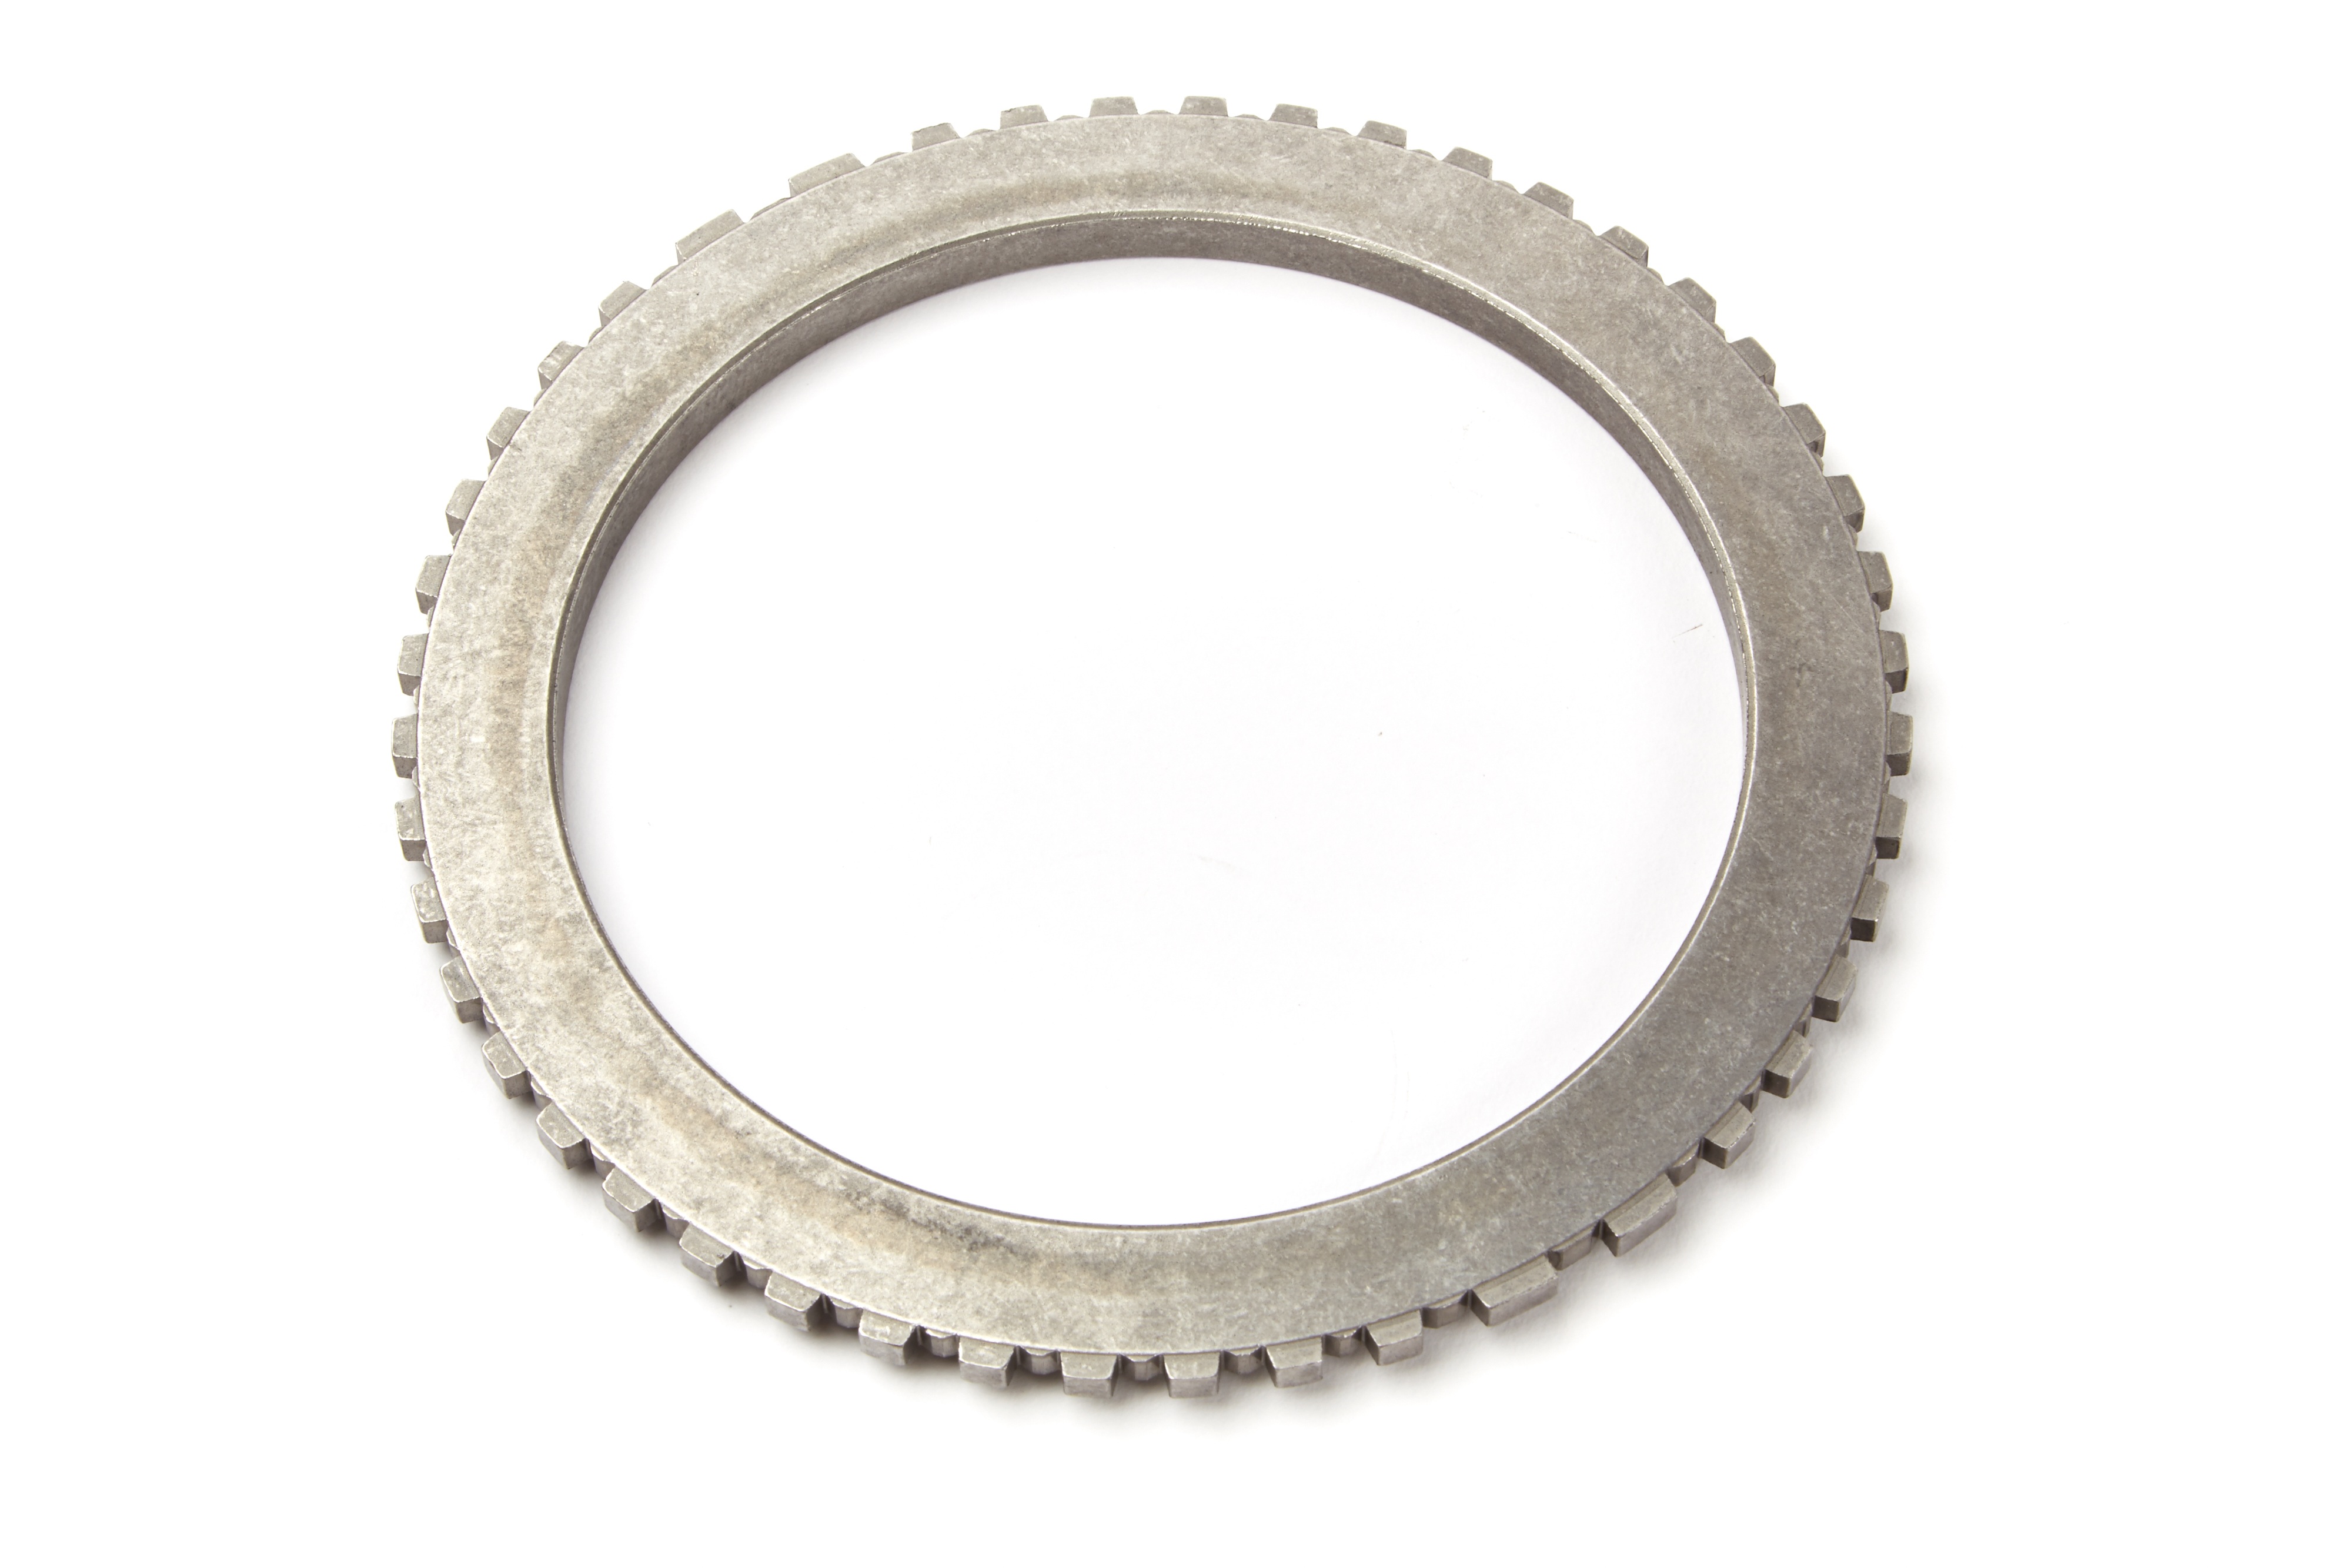 GM GENUINE PARTS - Automatic Transmission Clutch Backing Plate (2-3-4-6-8) - GMP 24261013